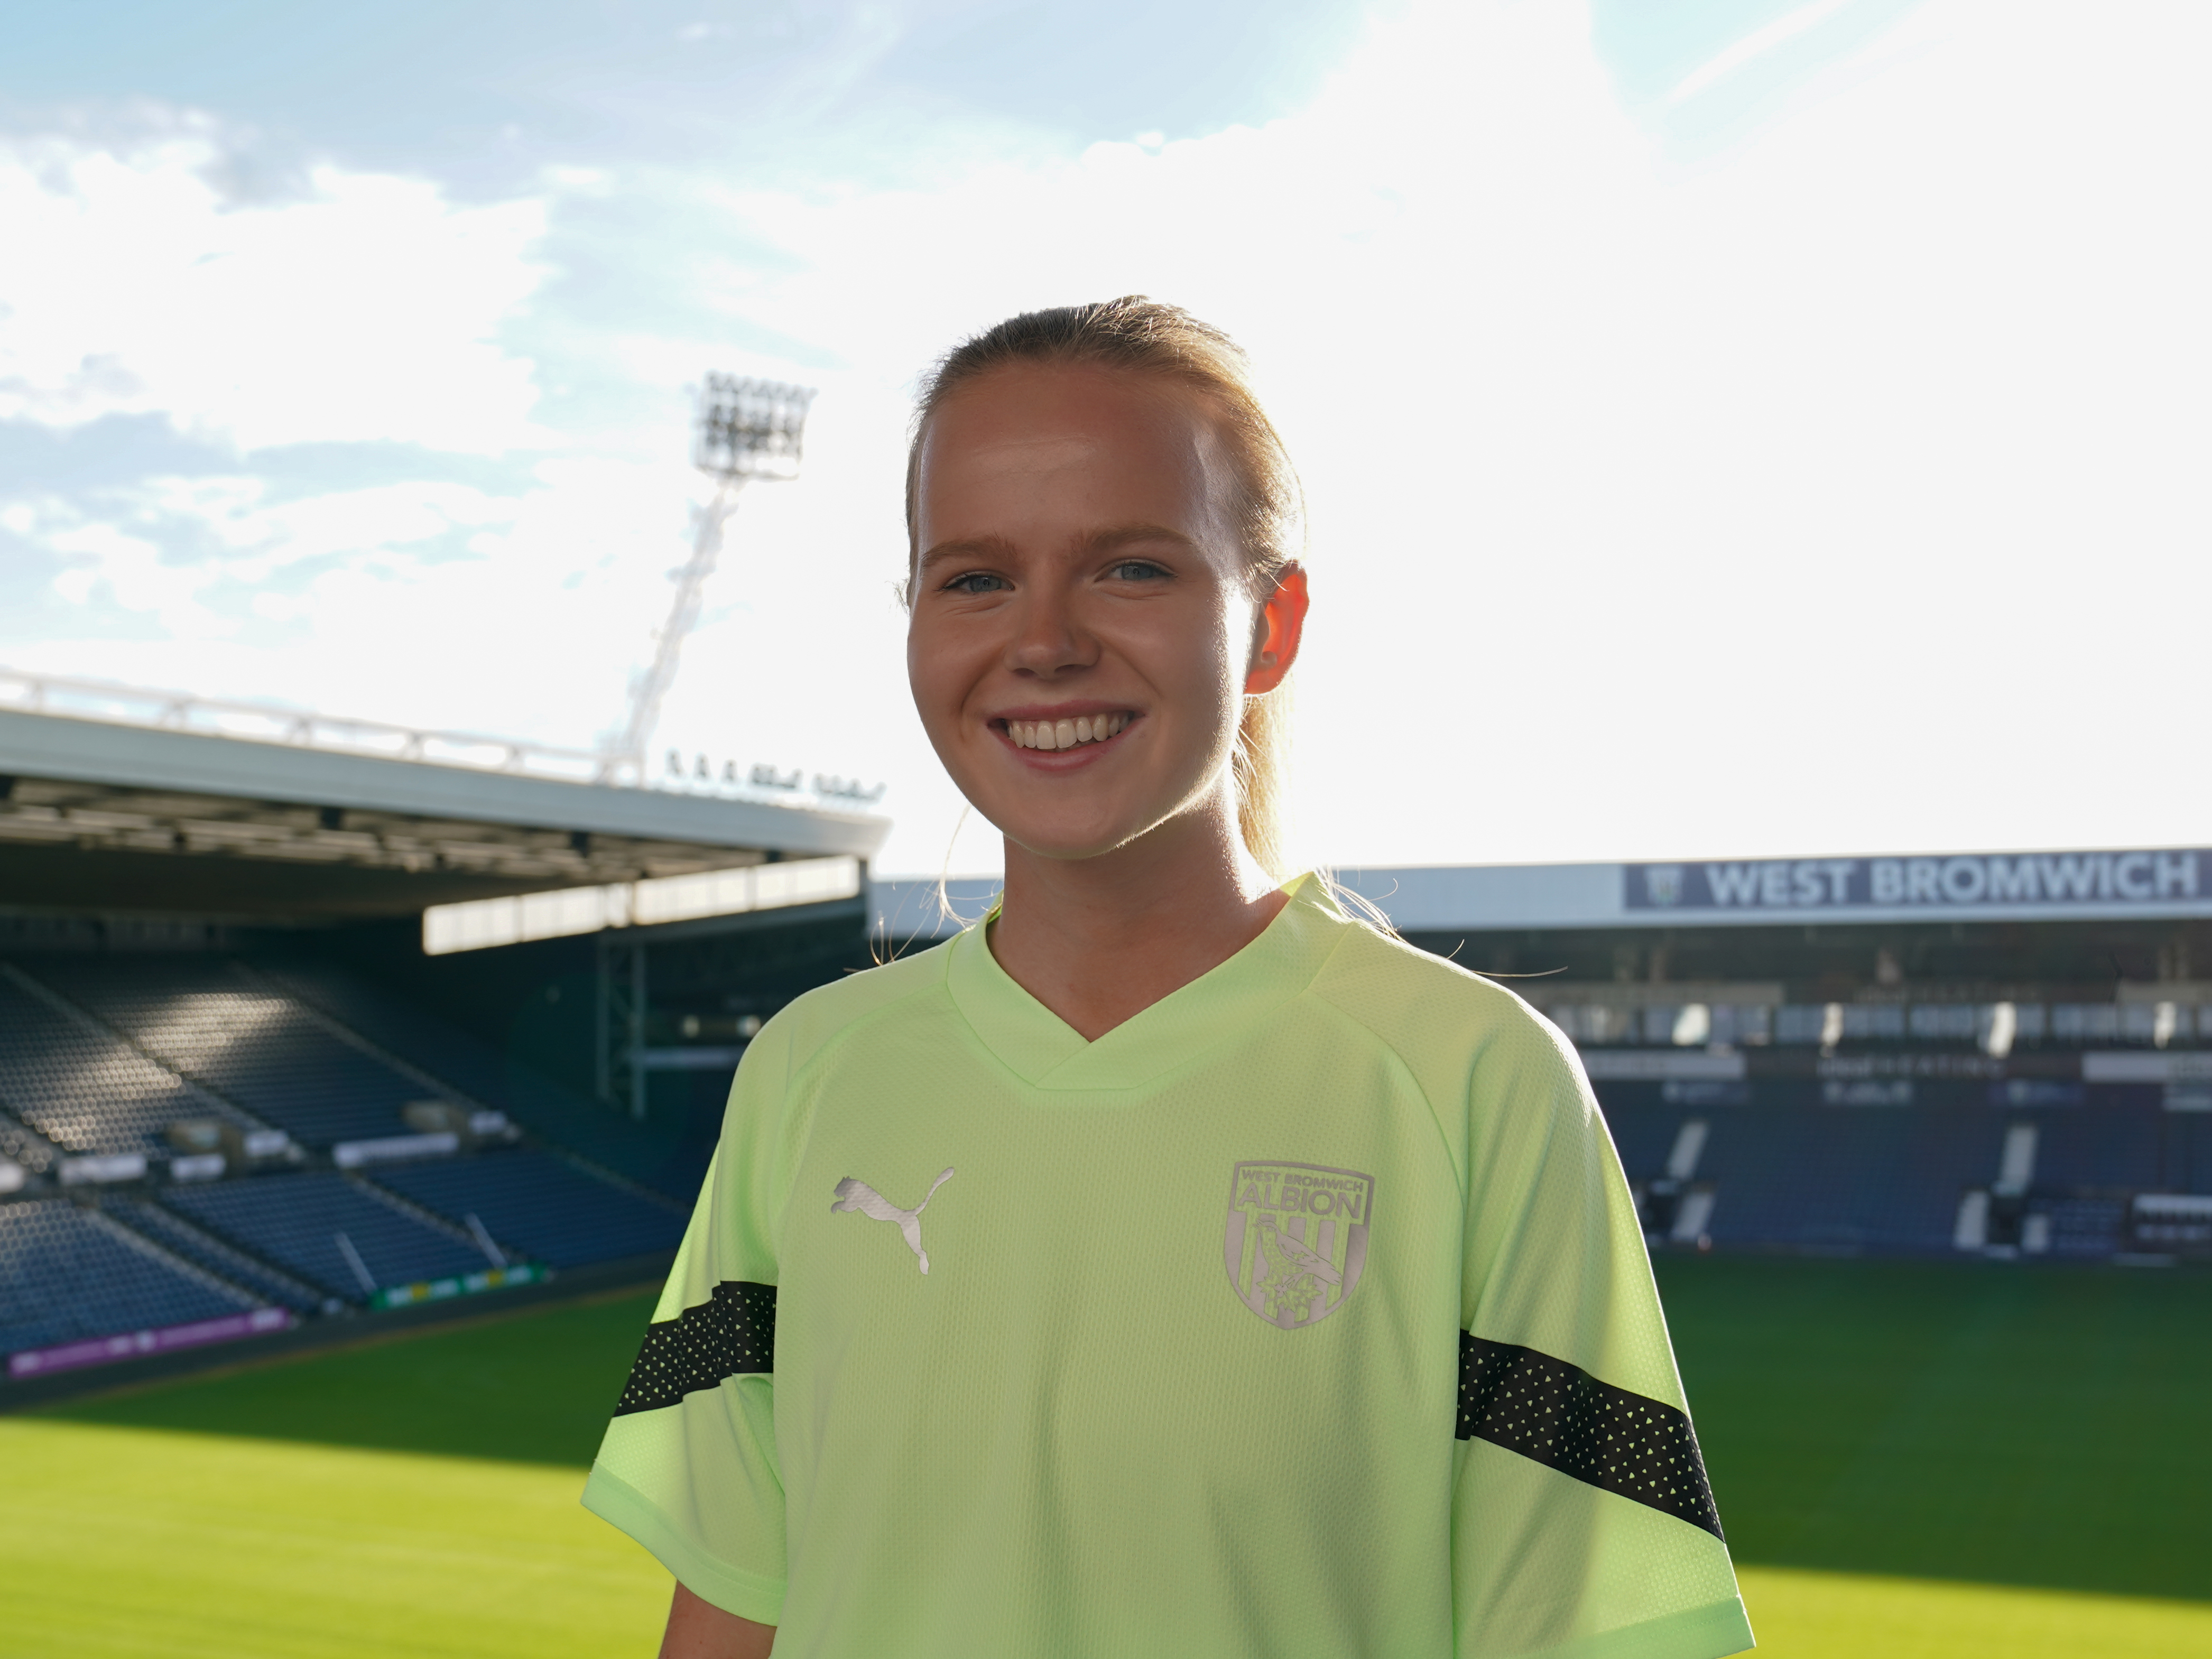 Albion Women have confirmed the signing of Phoebe Warner from Coventry United